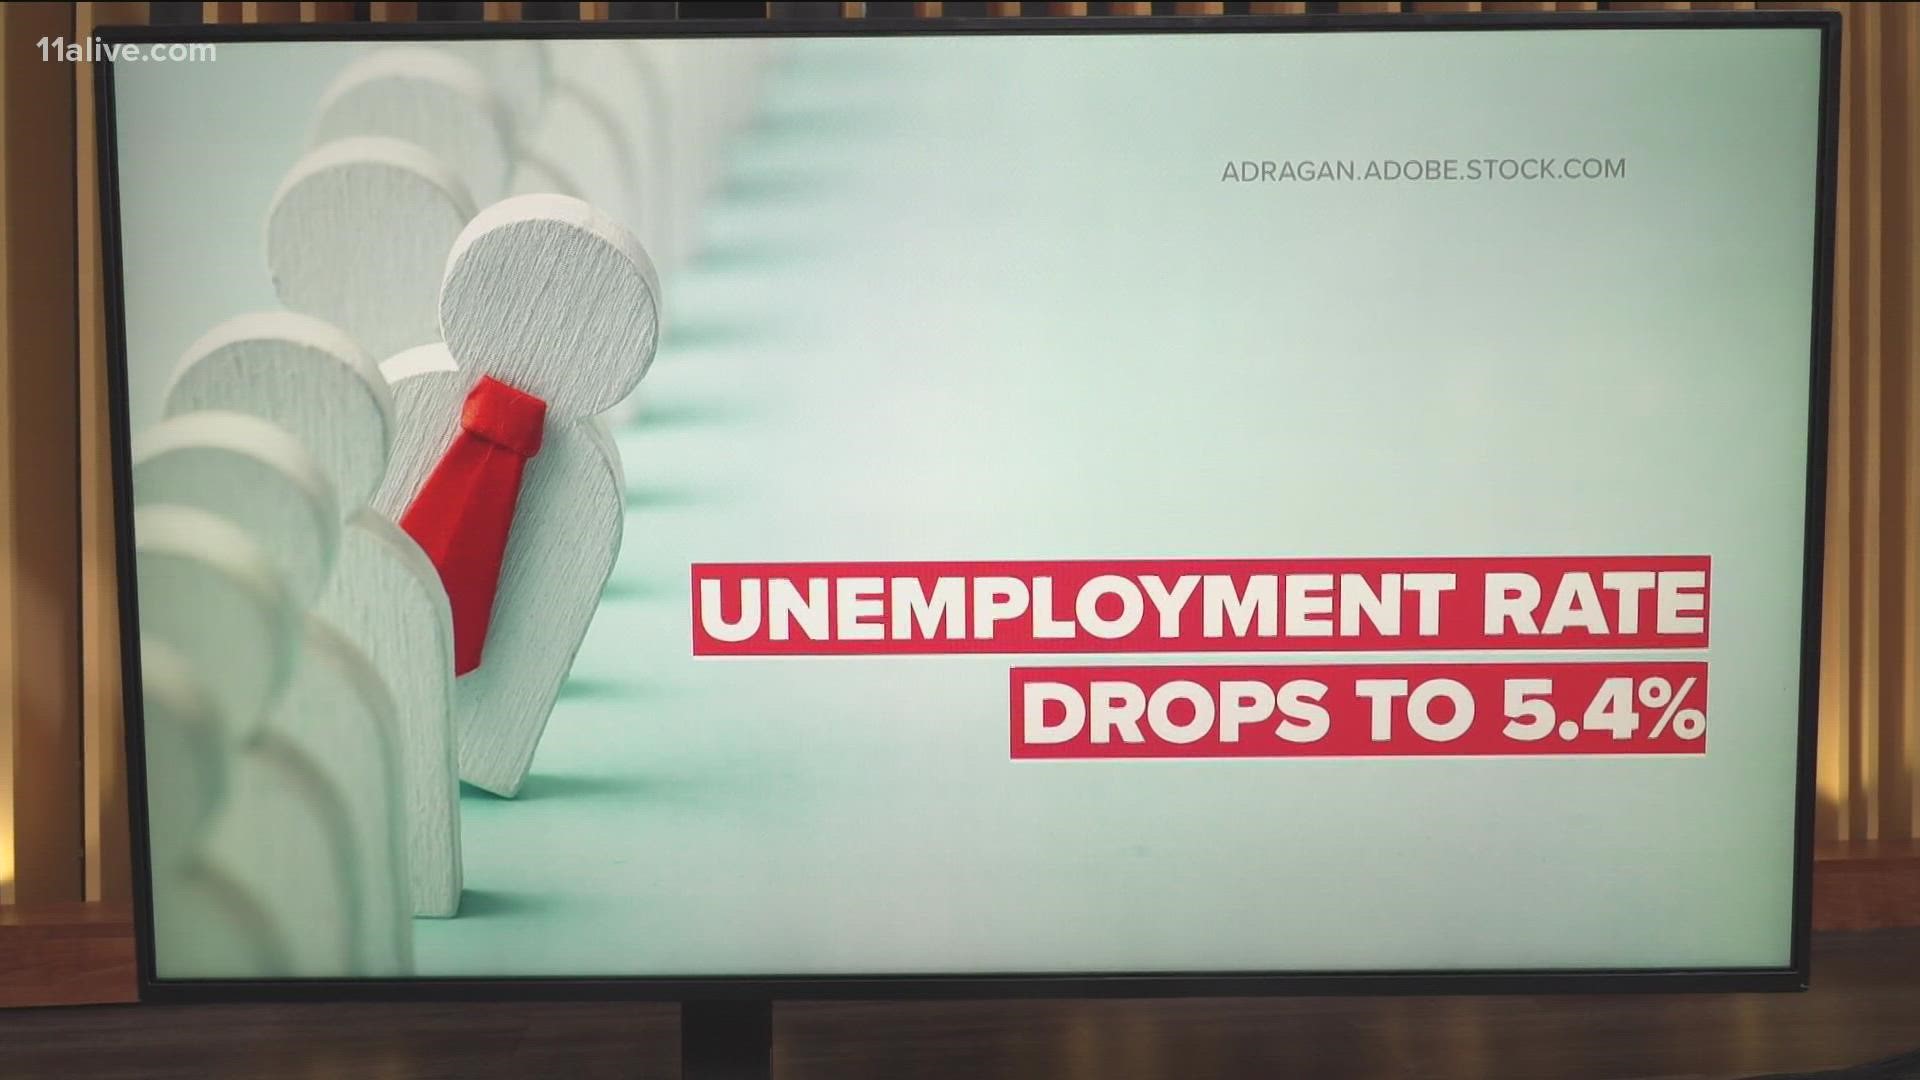 The jobs report lowered the unemployment rate